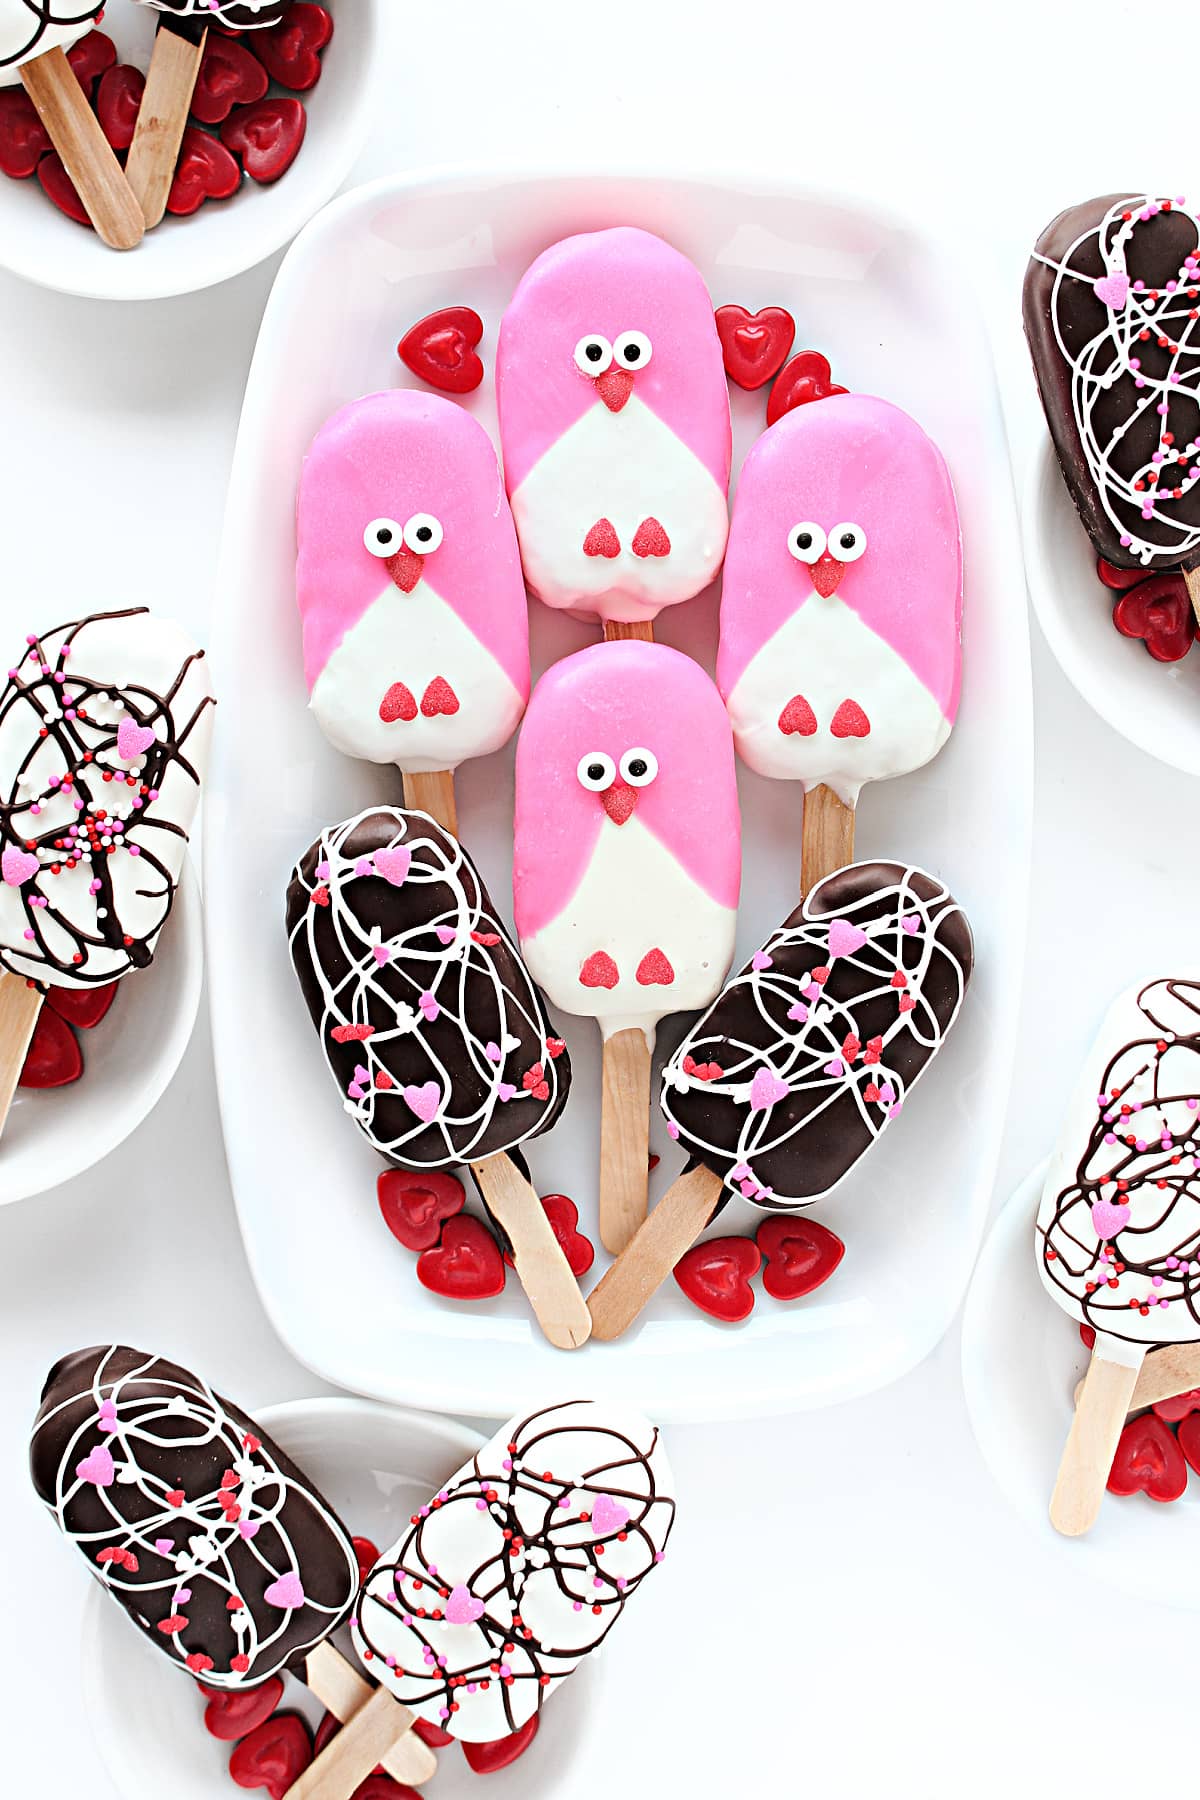 Peanut Chews Pops decorated with candy melts and heart sprinkles in swirls and as love birds.